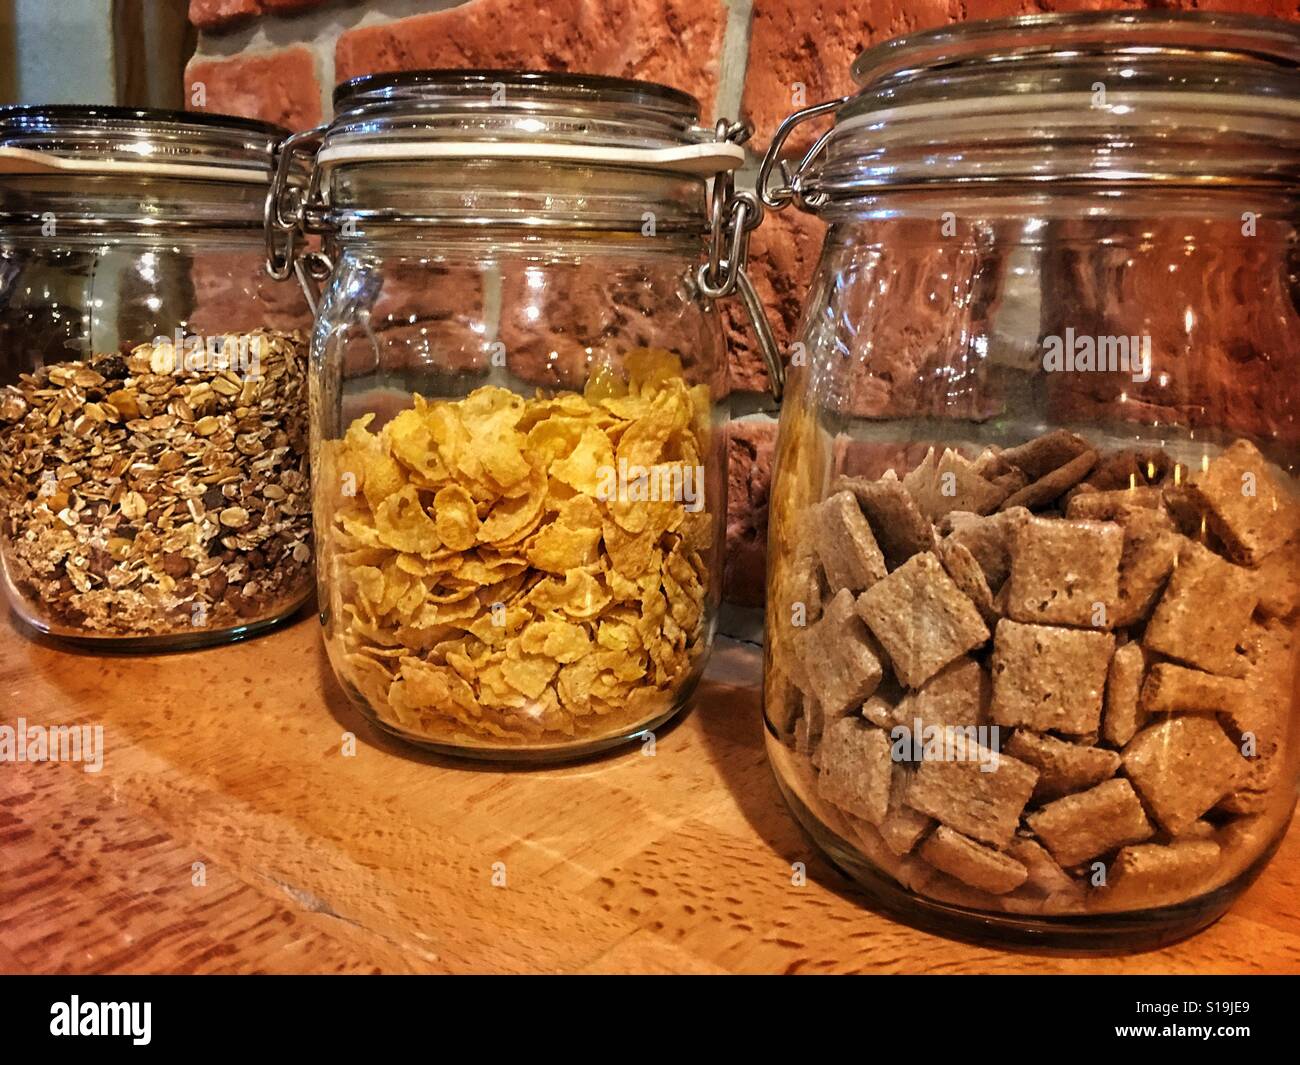 Three jars filled with cornflakes, müsli and other meal for breakfast Stock Photo